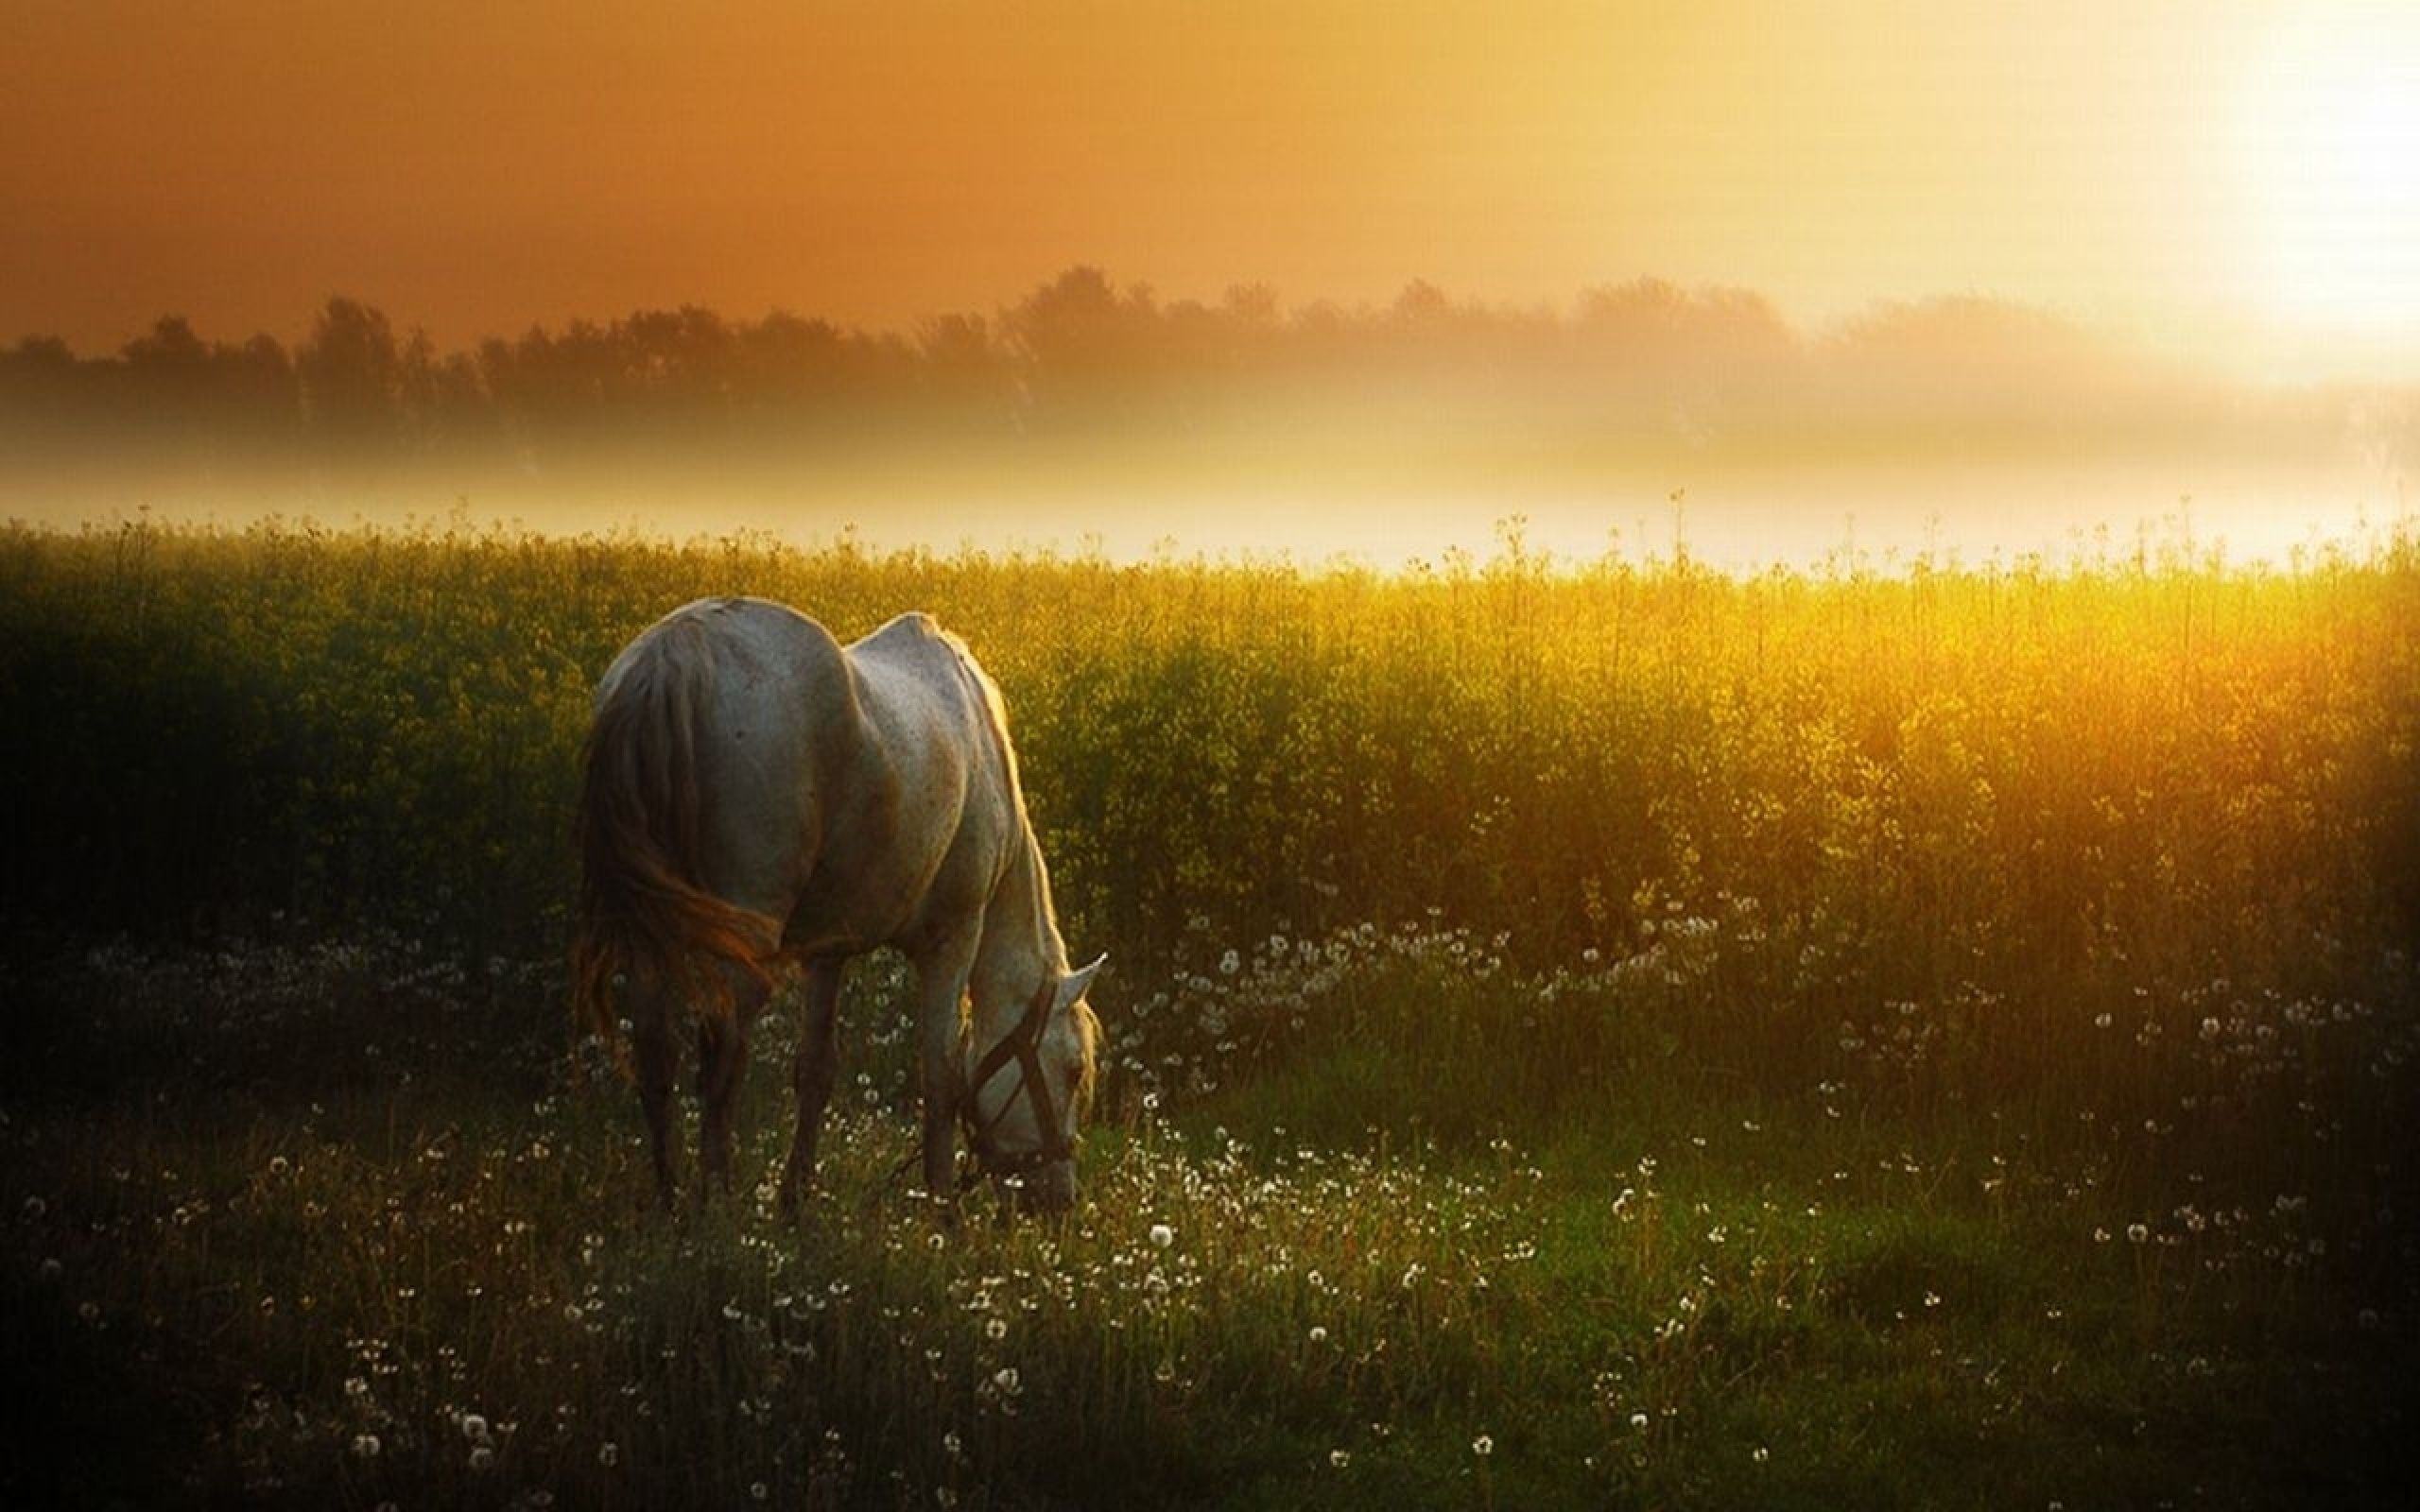 2560x1600 Sunset Meadow & White Horse desktop PC and Mac wallpaper on W...